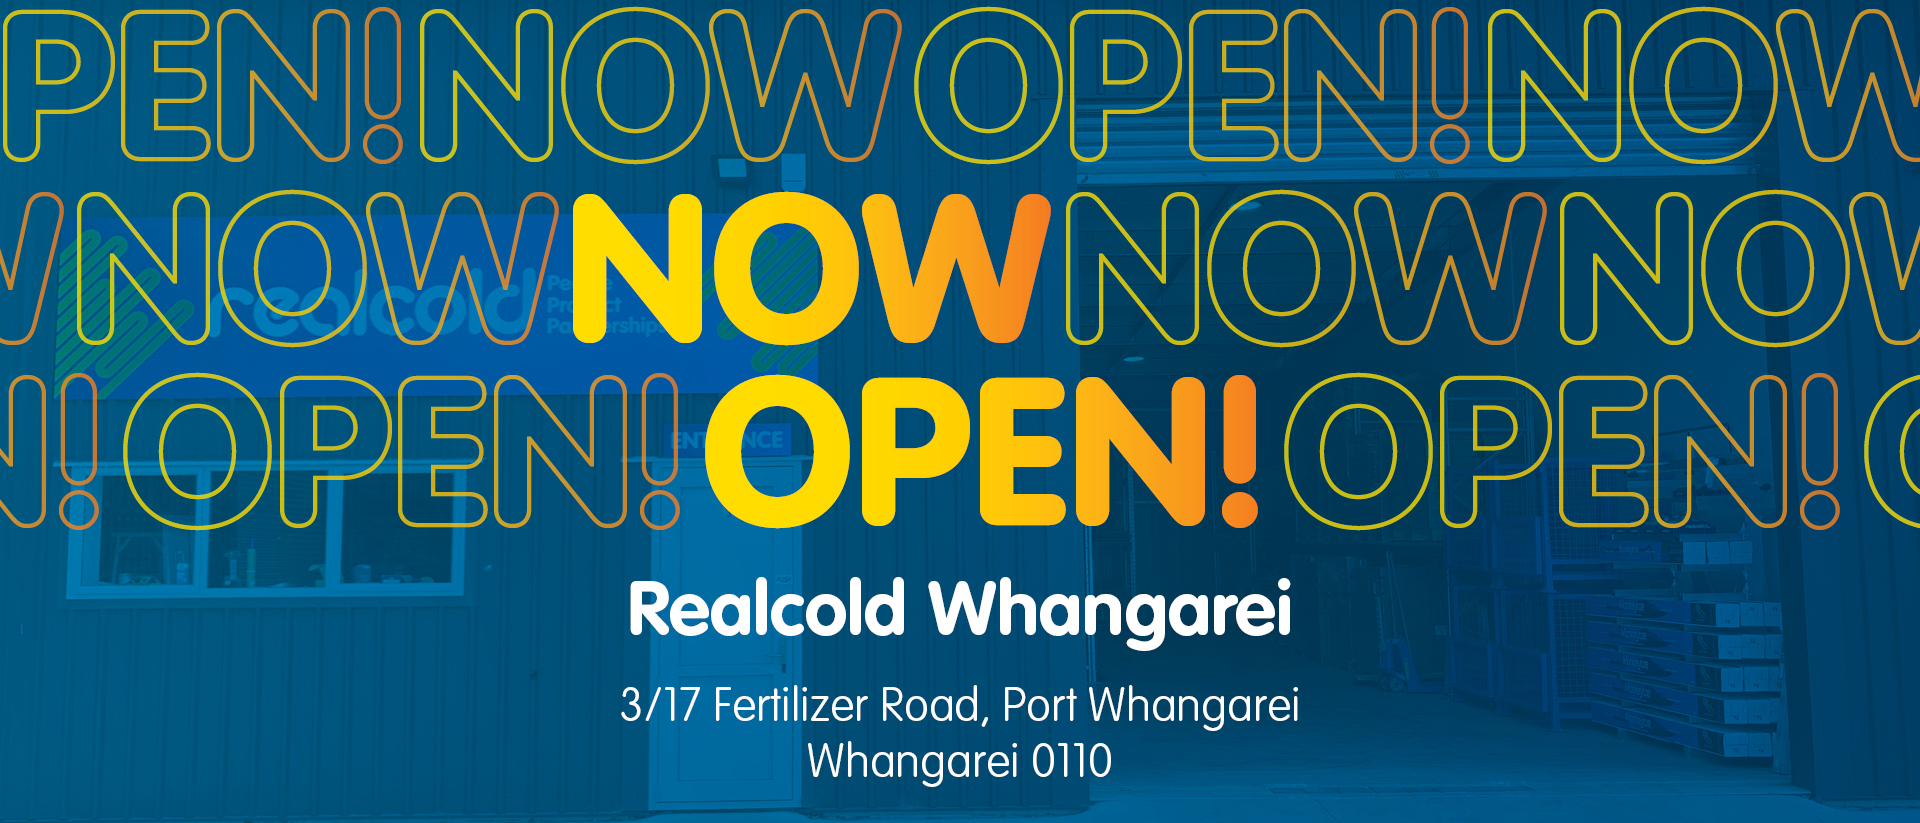 Realcold Whangarei is officially open for business!